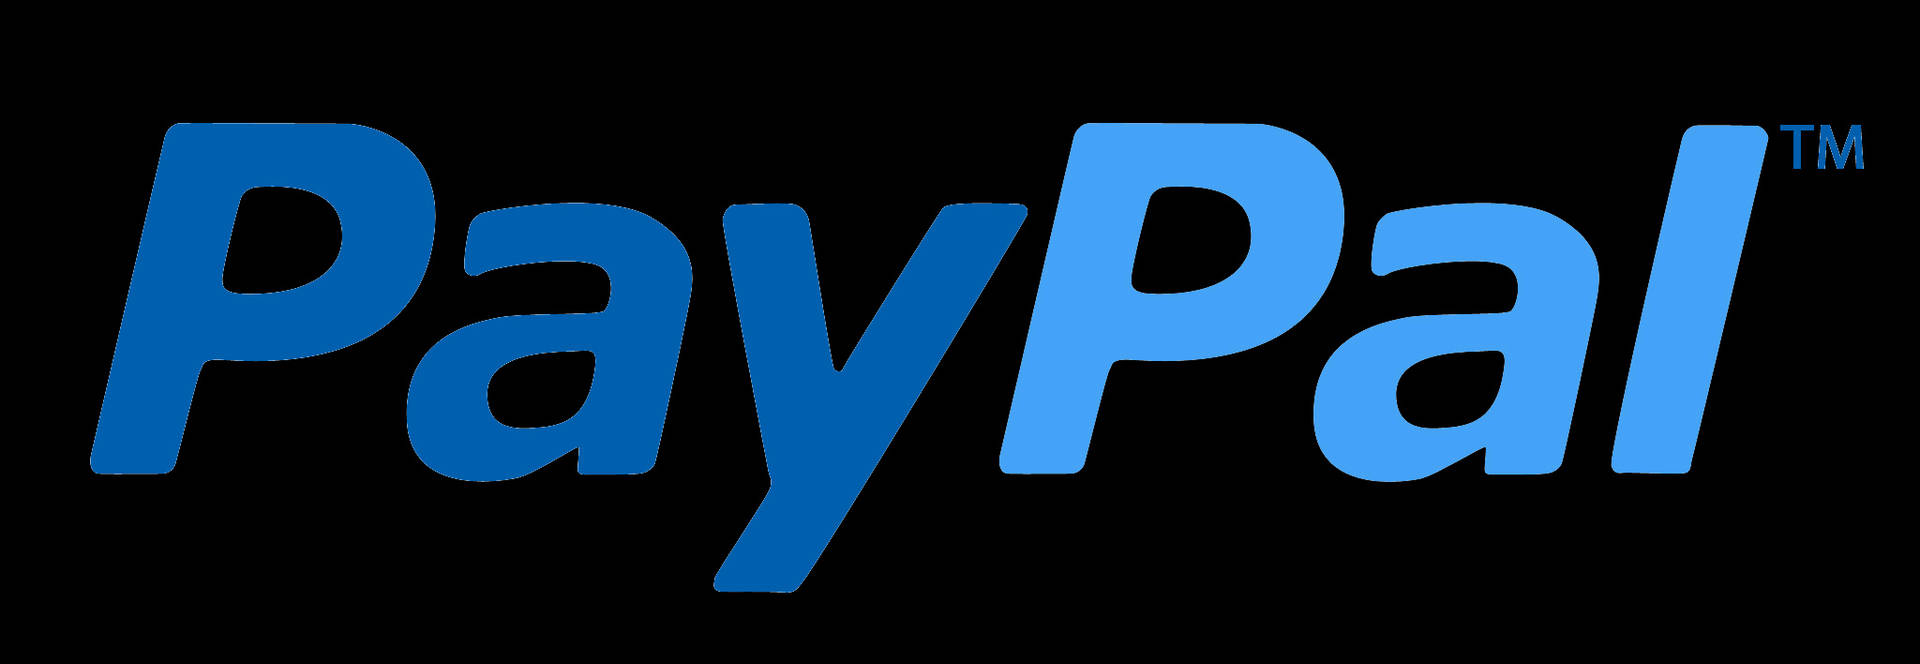 Paypal Name In Black Background Background